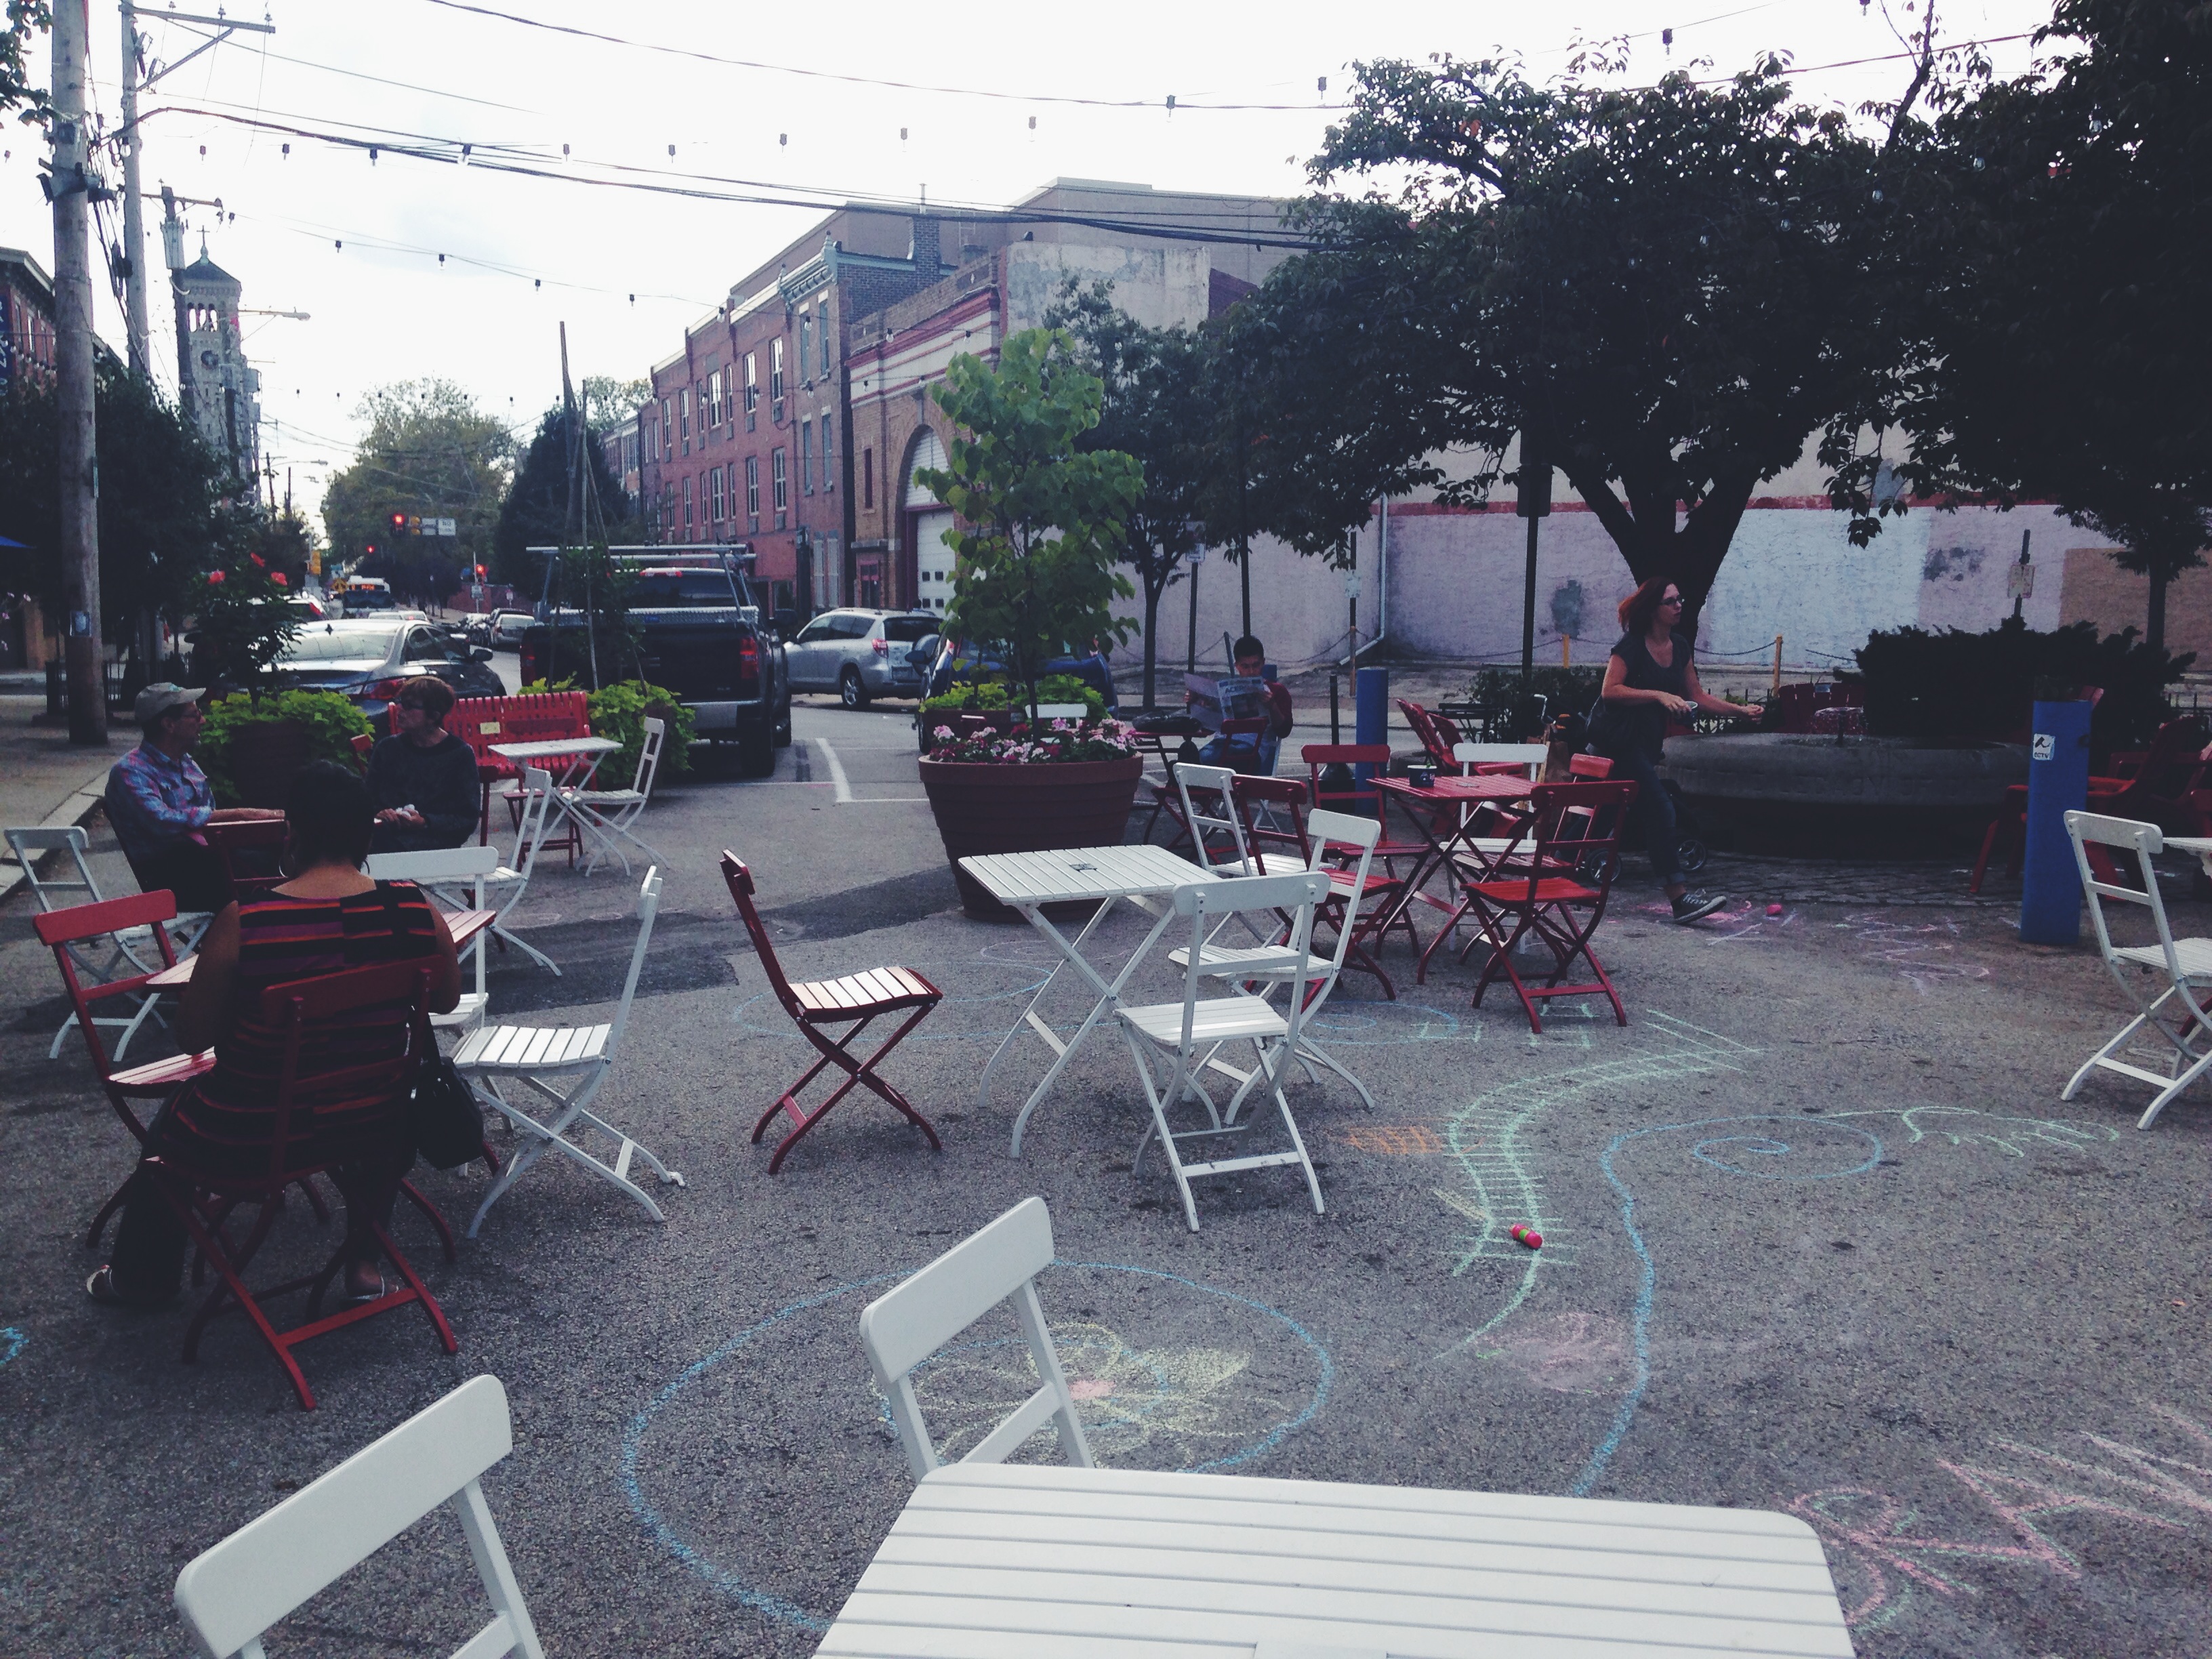 Last stop: Grays Ferry Triangle - an example of a pop-up park that grew up to become a real pedestrian plaza, and is now on the path to permanency.